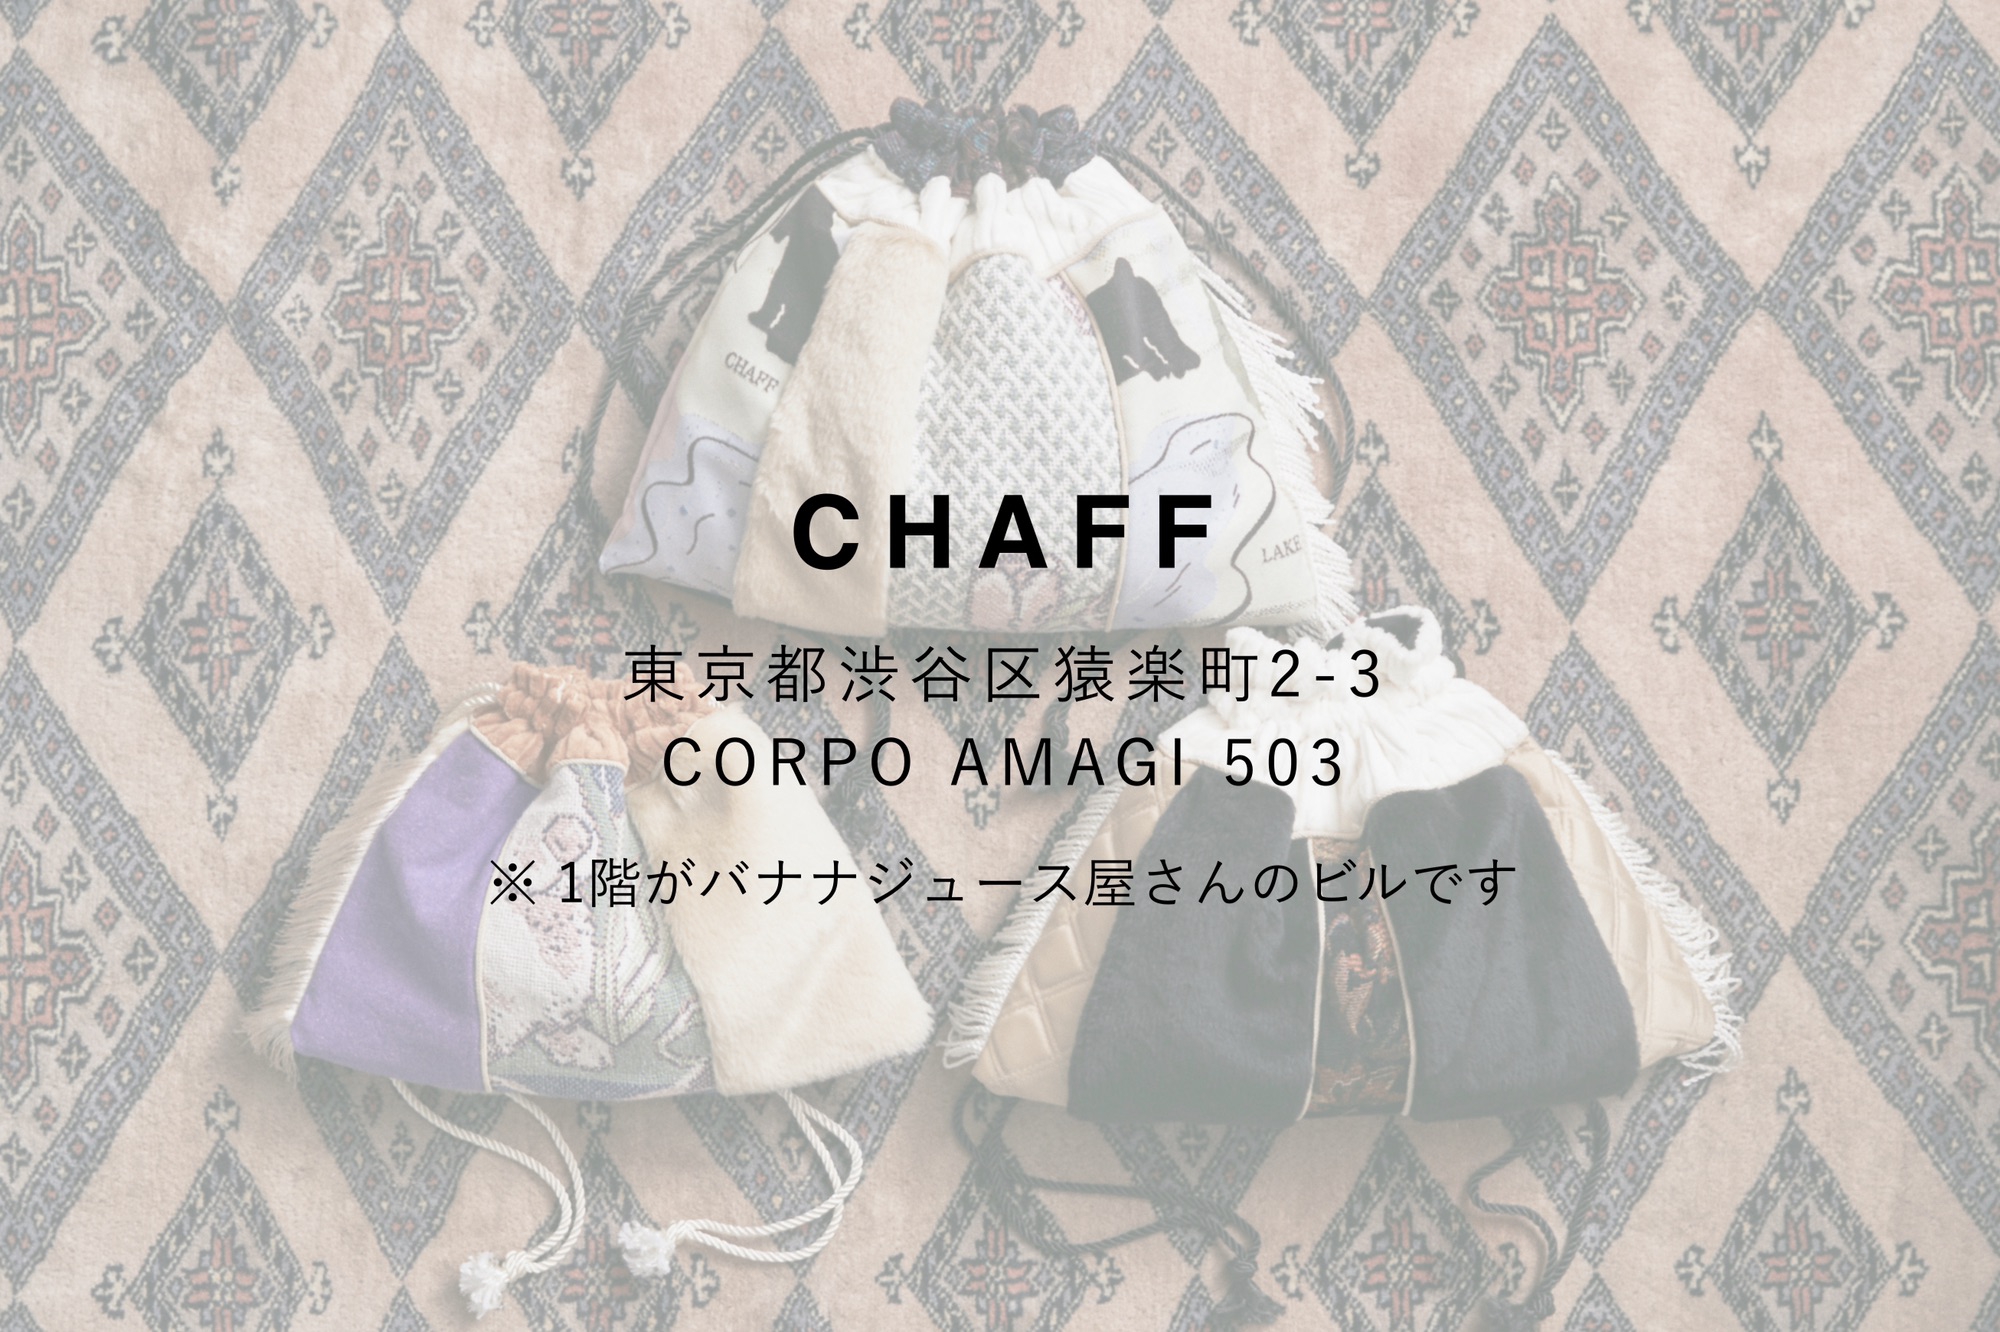 2021 CHAFF OPEN EVENT! | CHAFF